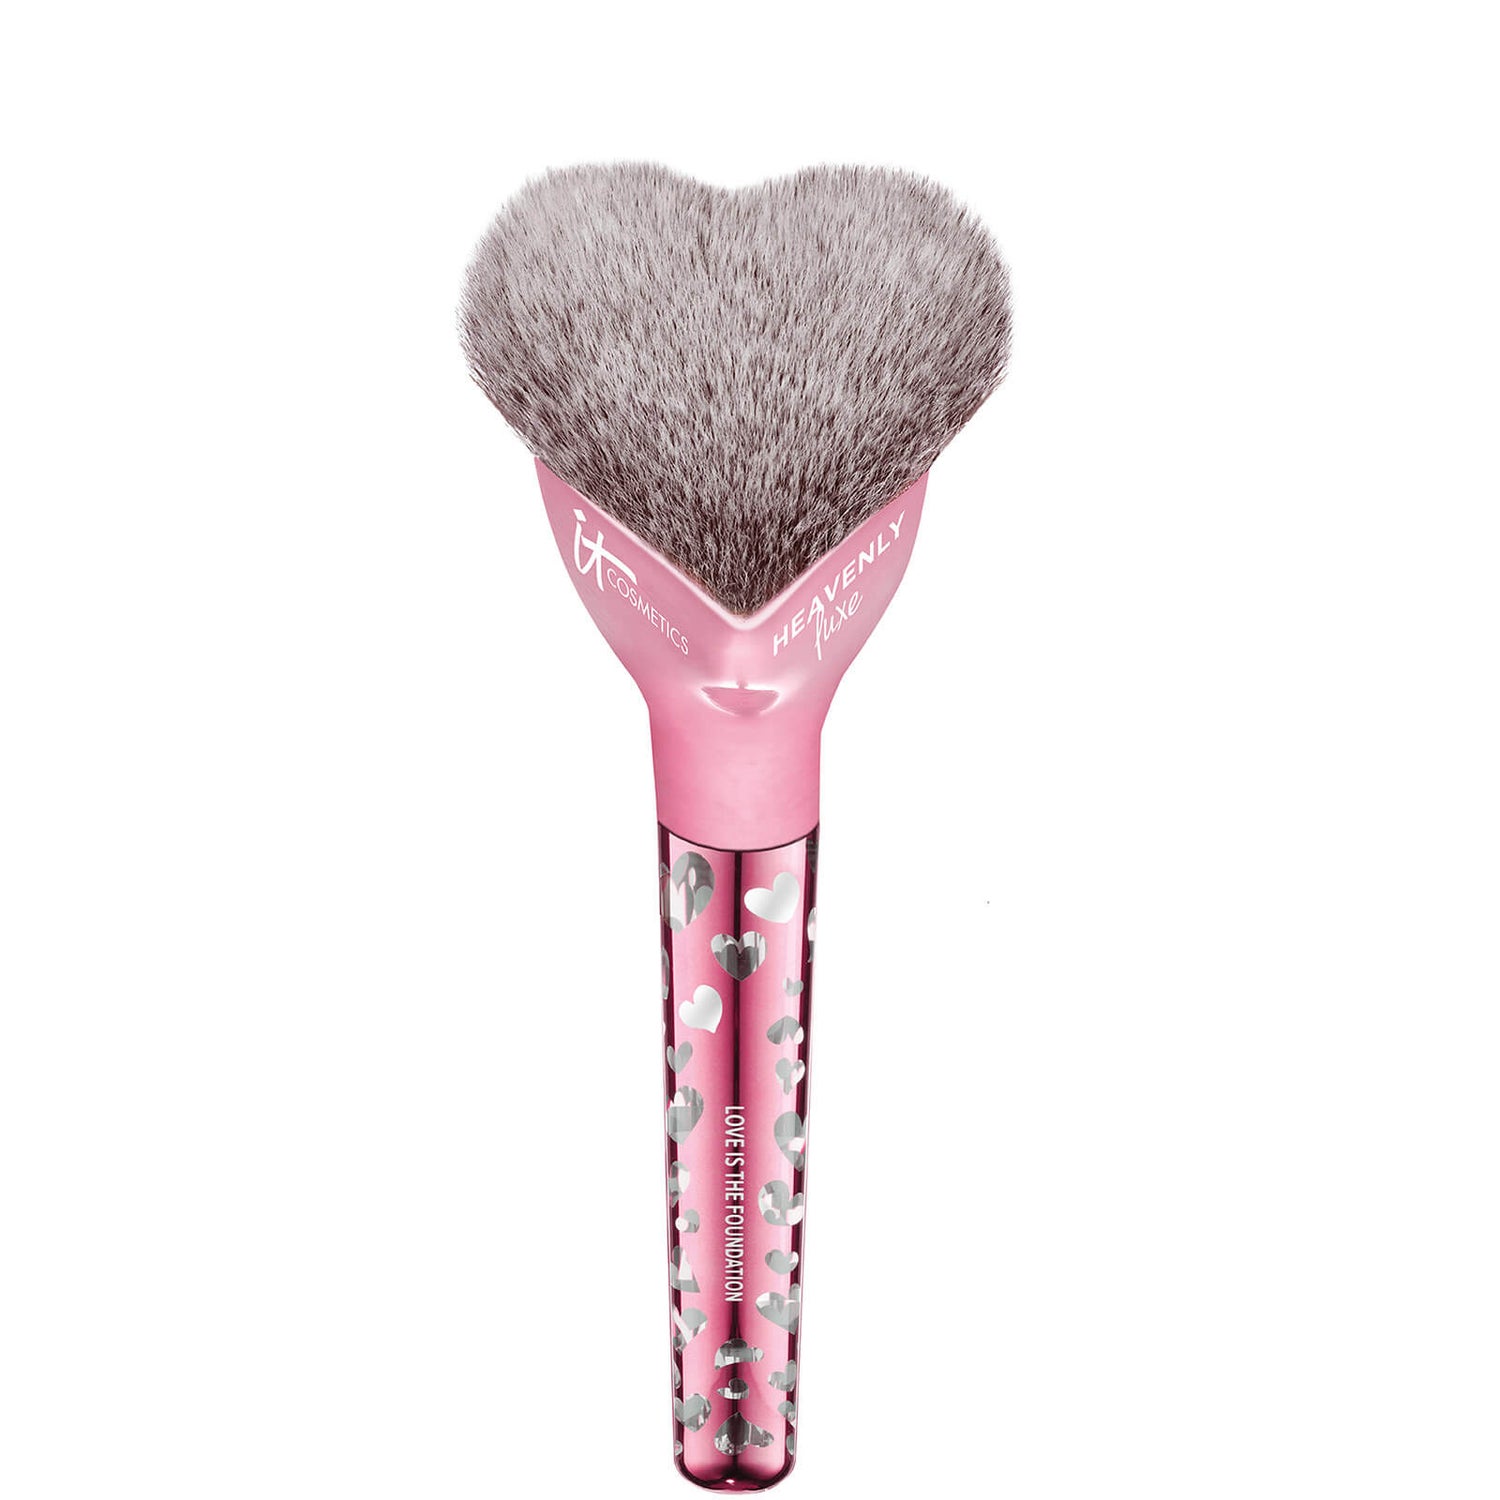 IT Cosmetics Love is the Foundation Brush